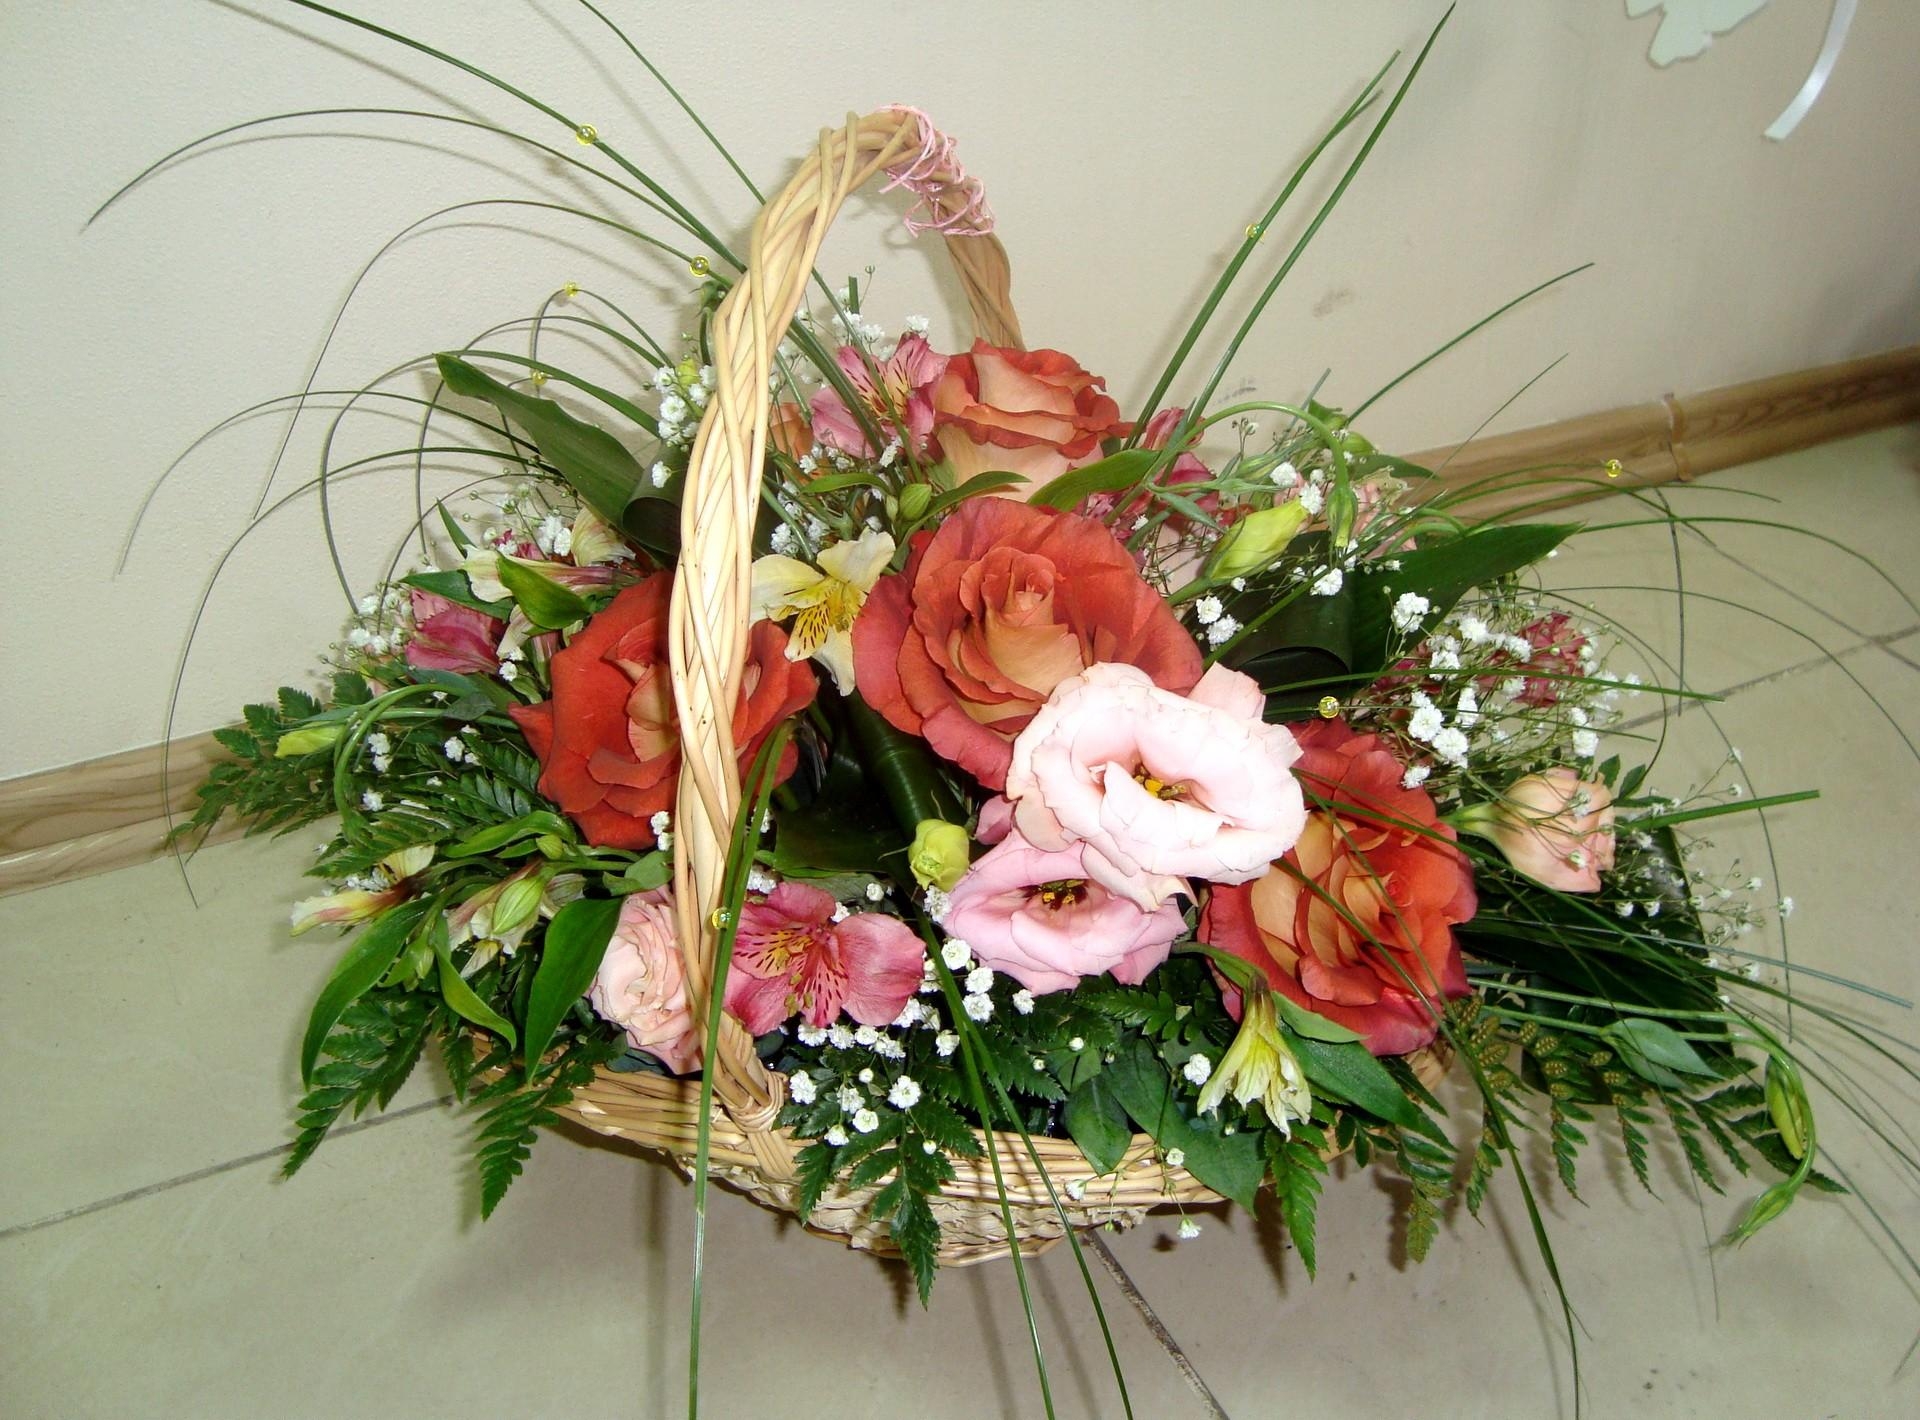 flowers, roses, fern, alstroemeria, gypsophilus, gipsophile, basket, composition, lisianthus russell, lisiantus russell 8K